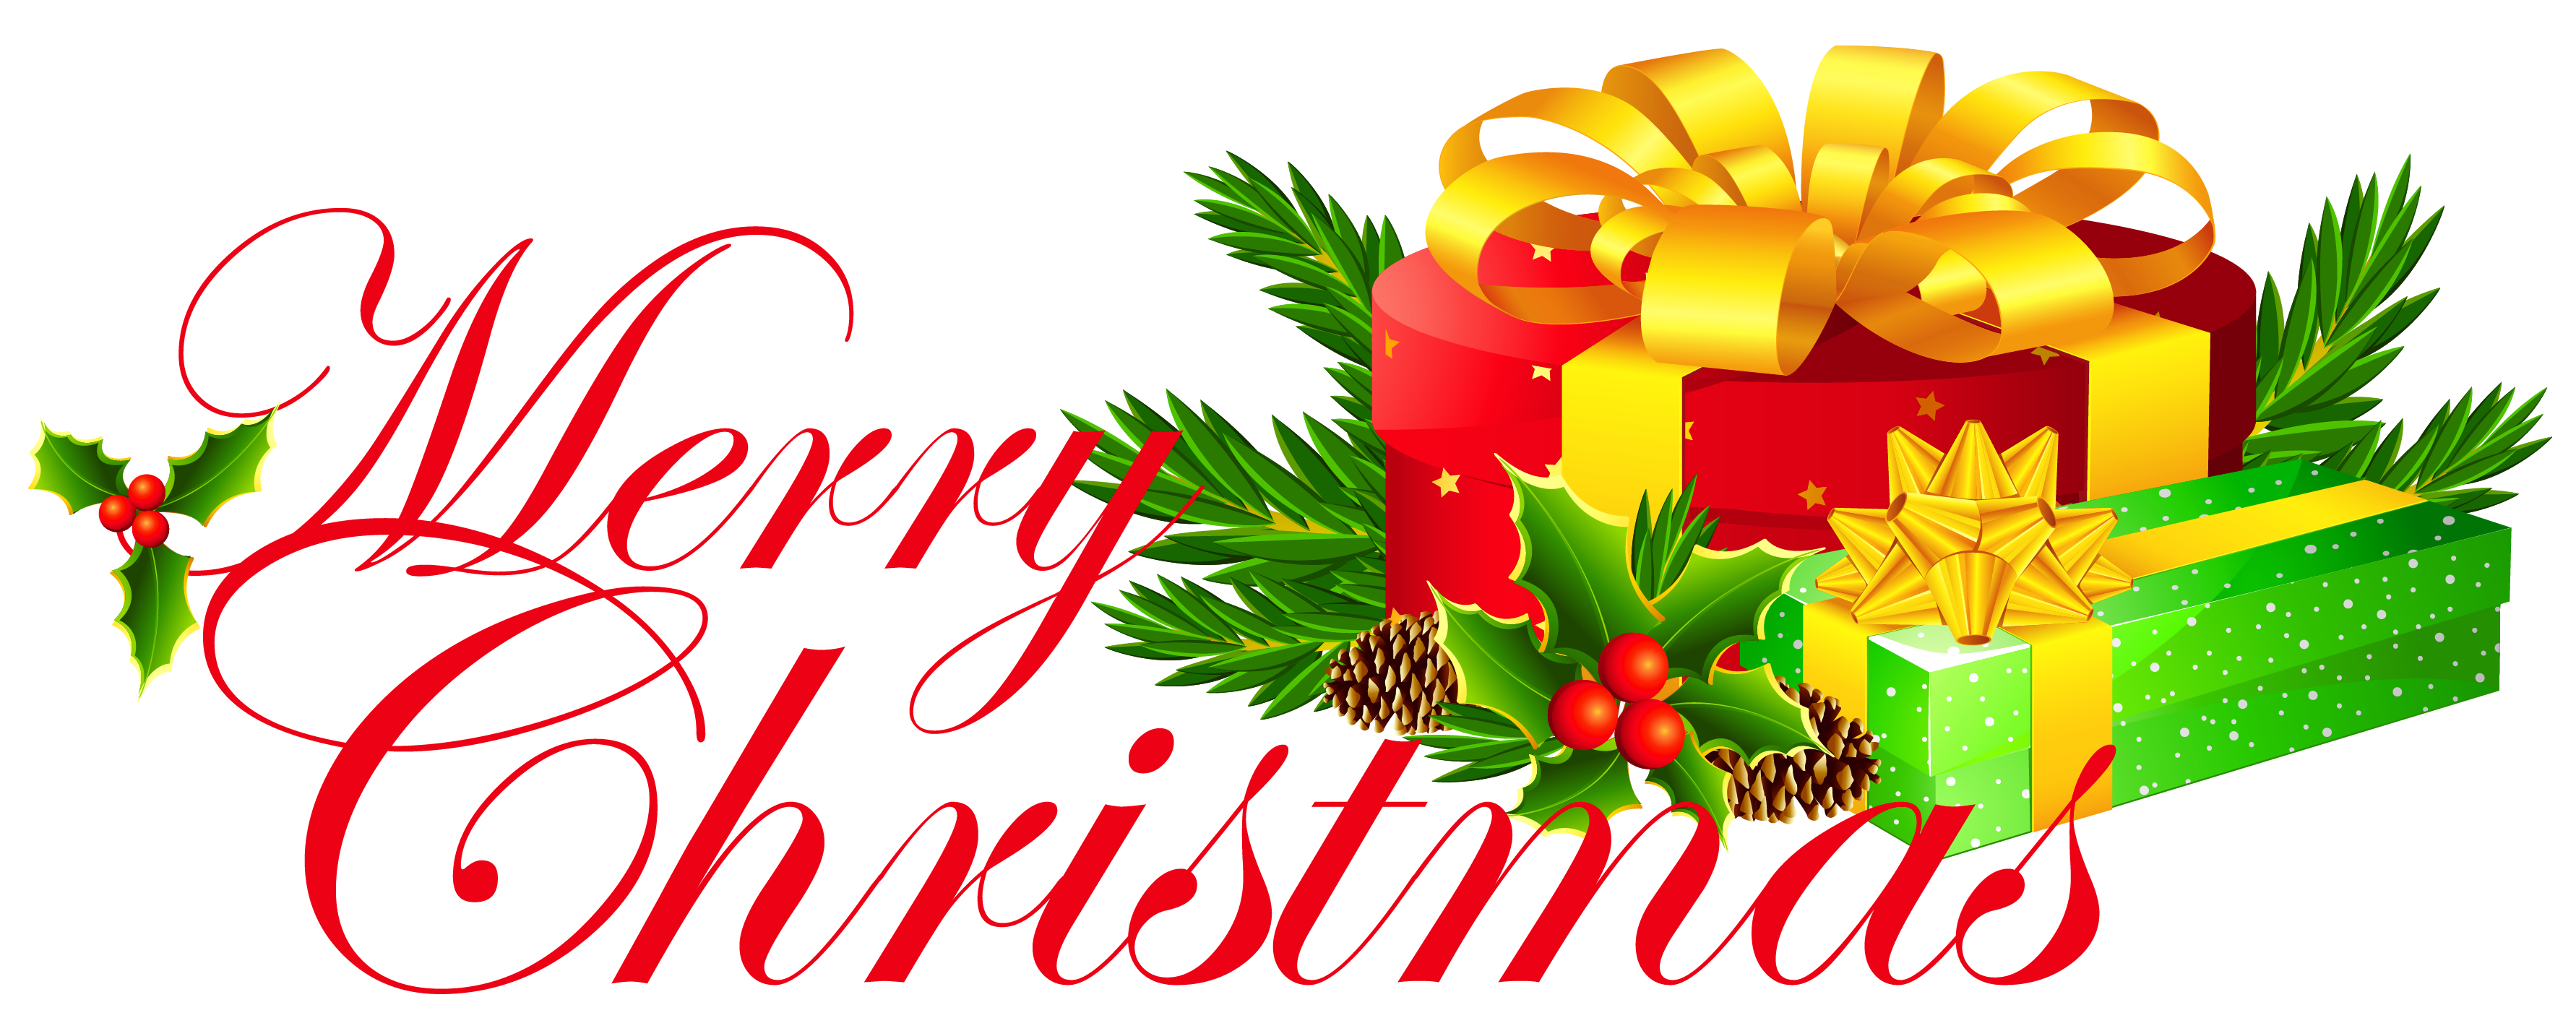 Free merry christmas images clip art